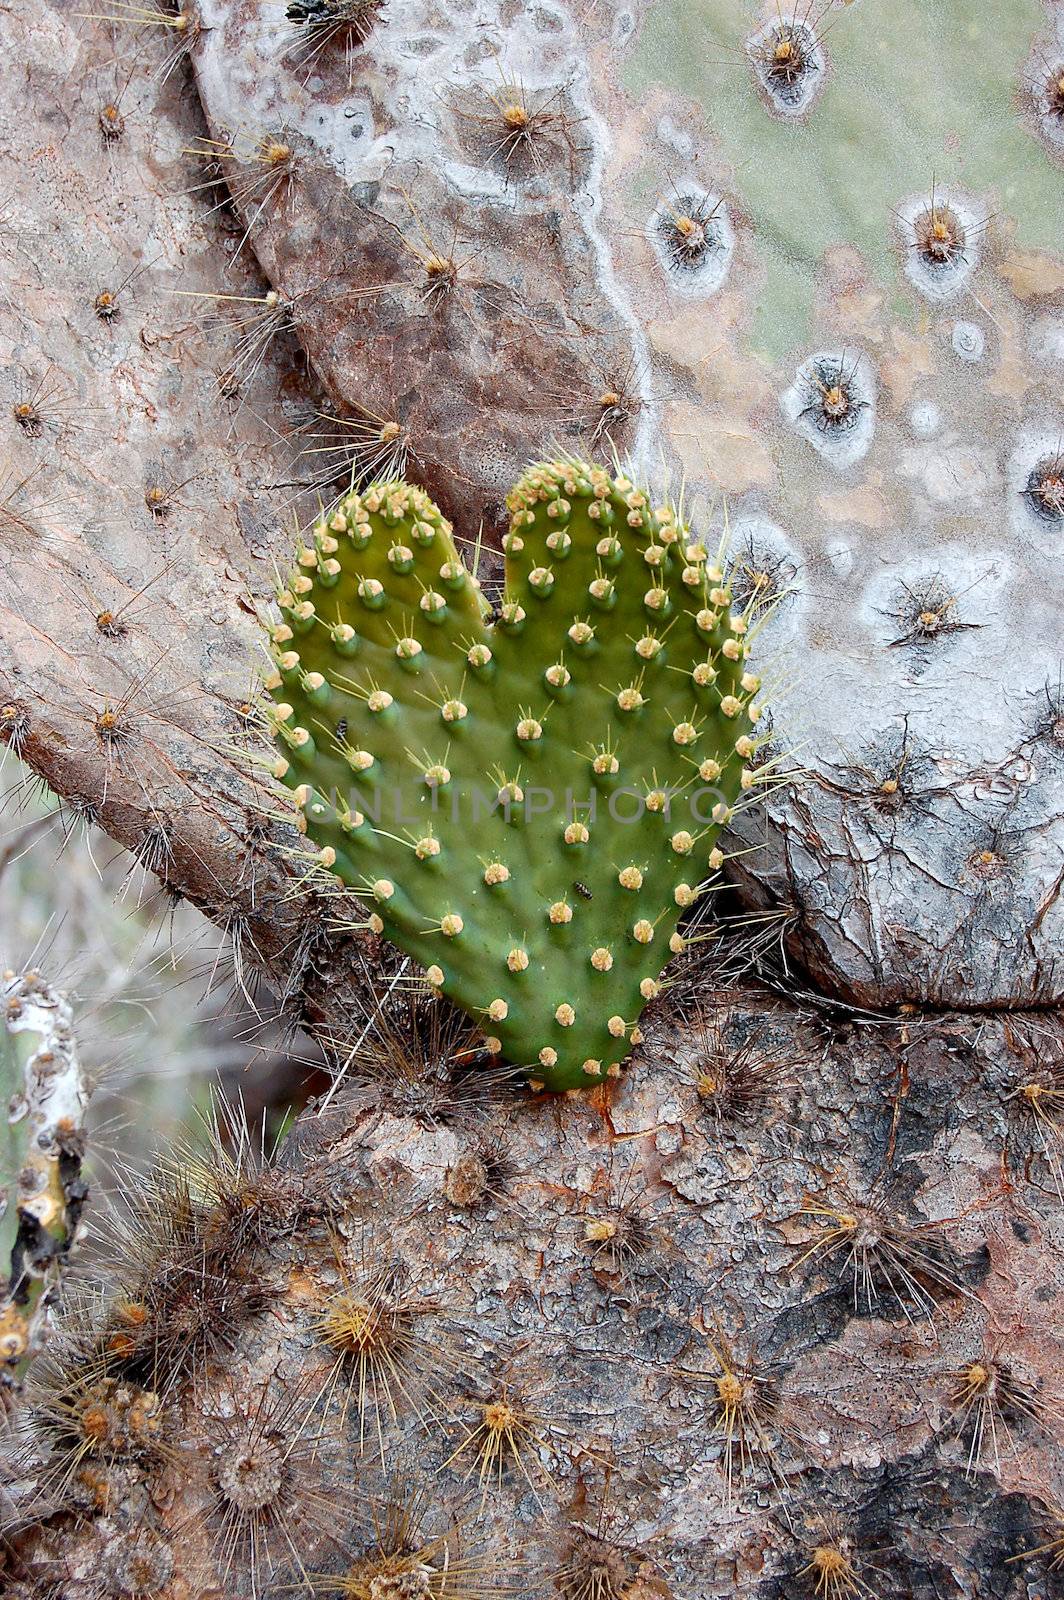 Symbolic heart-shaped green cactus leaf on an otherwise dead cactus plant